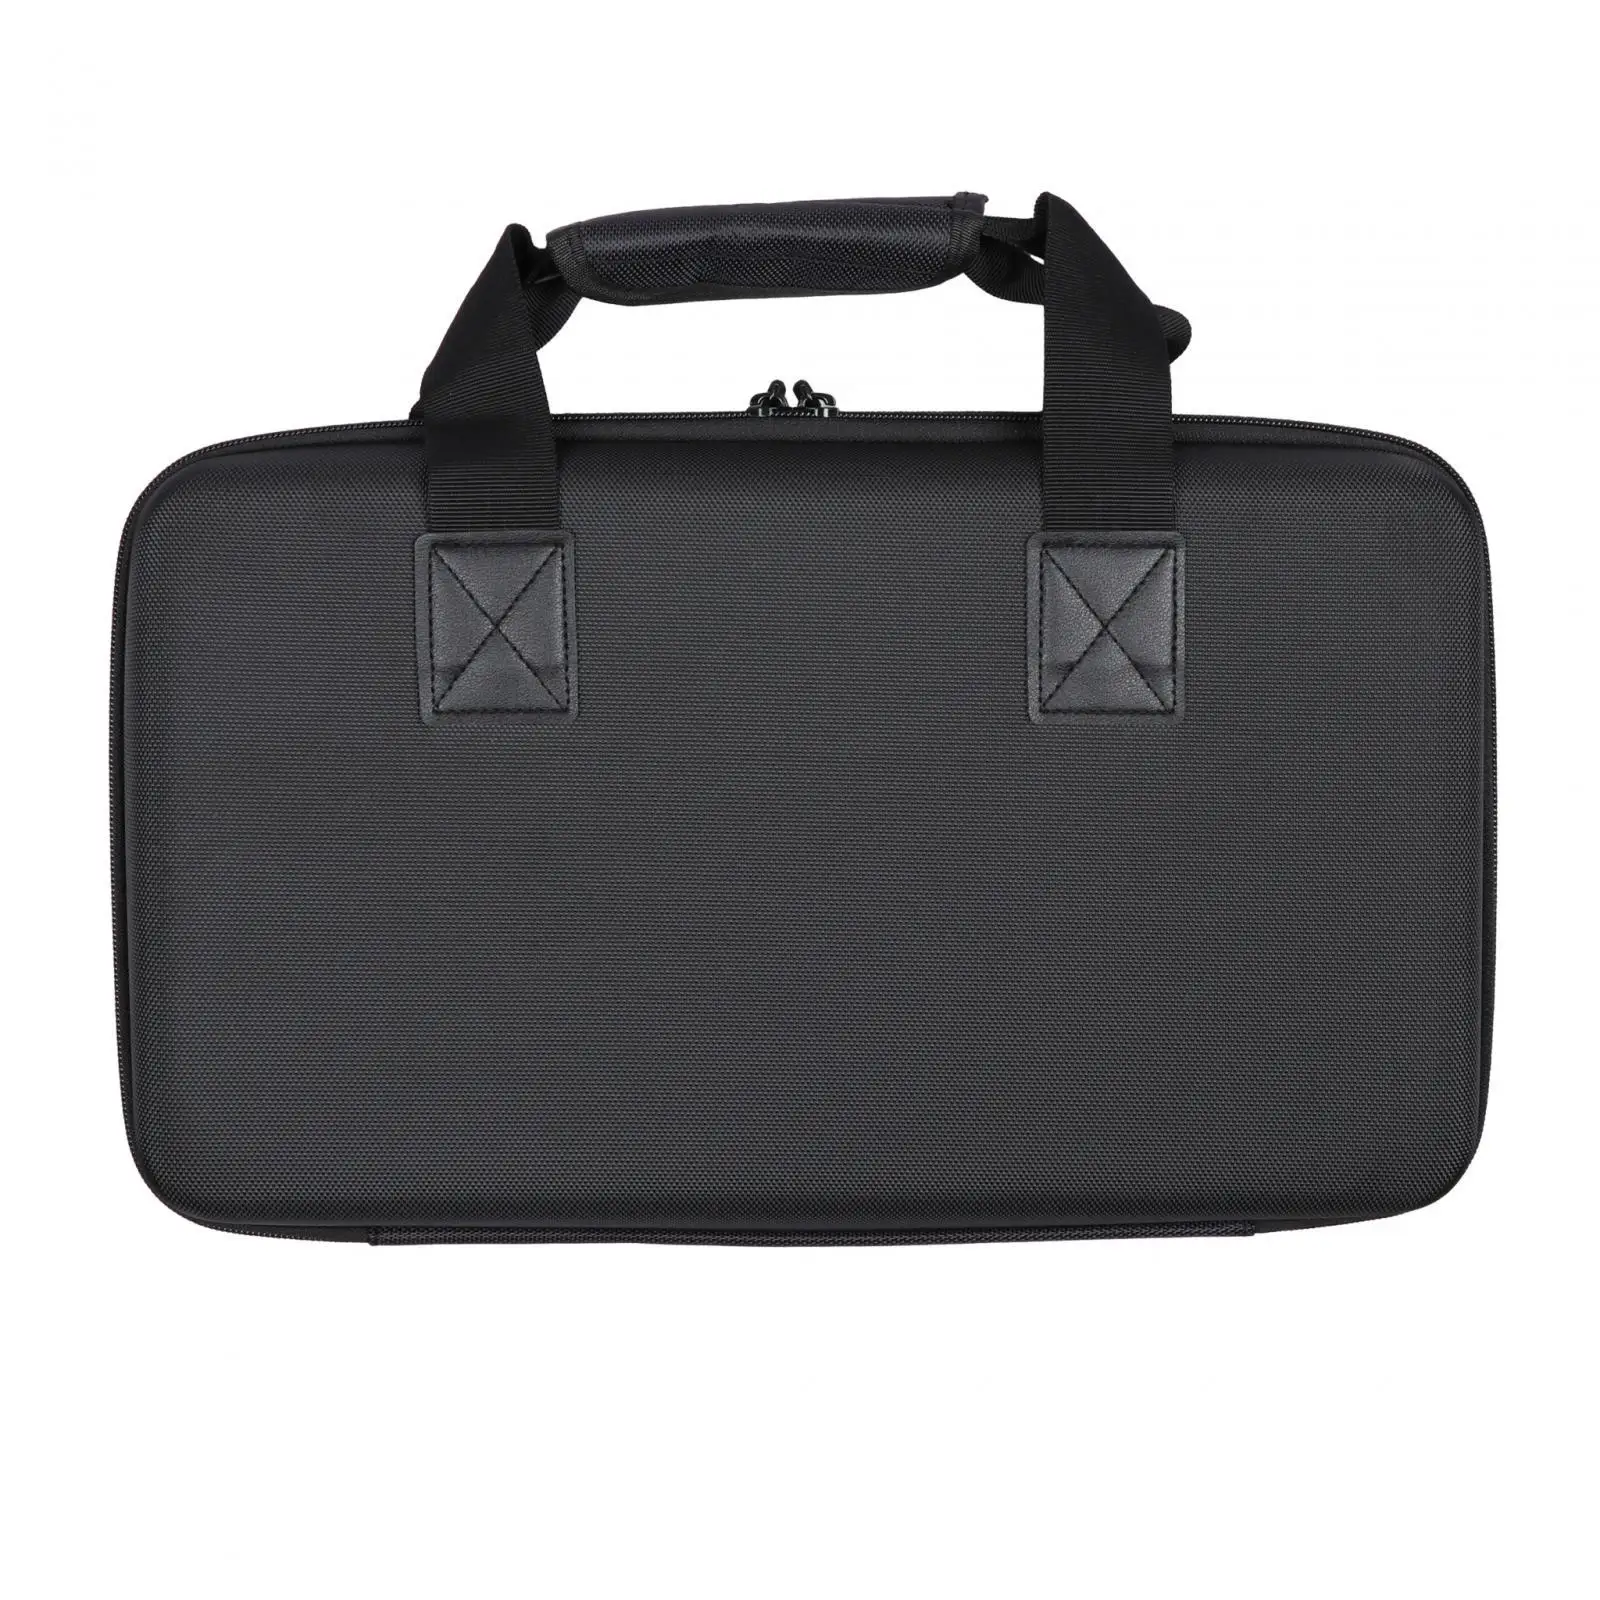 EVA with Portable Handle Waterproof for 400 DJ Equipment Case for Travel